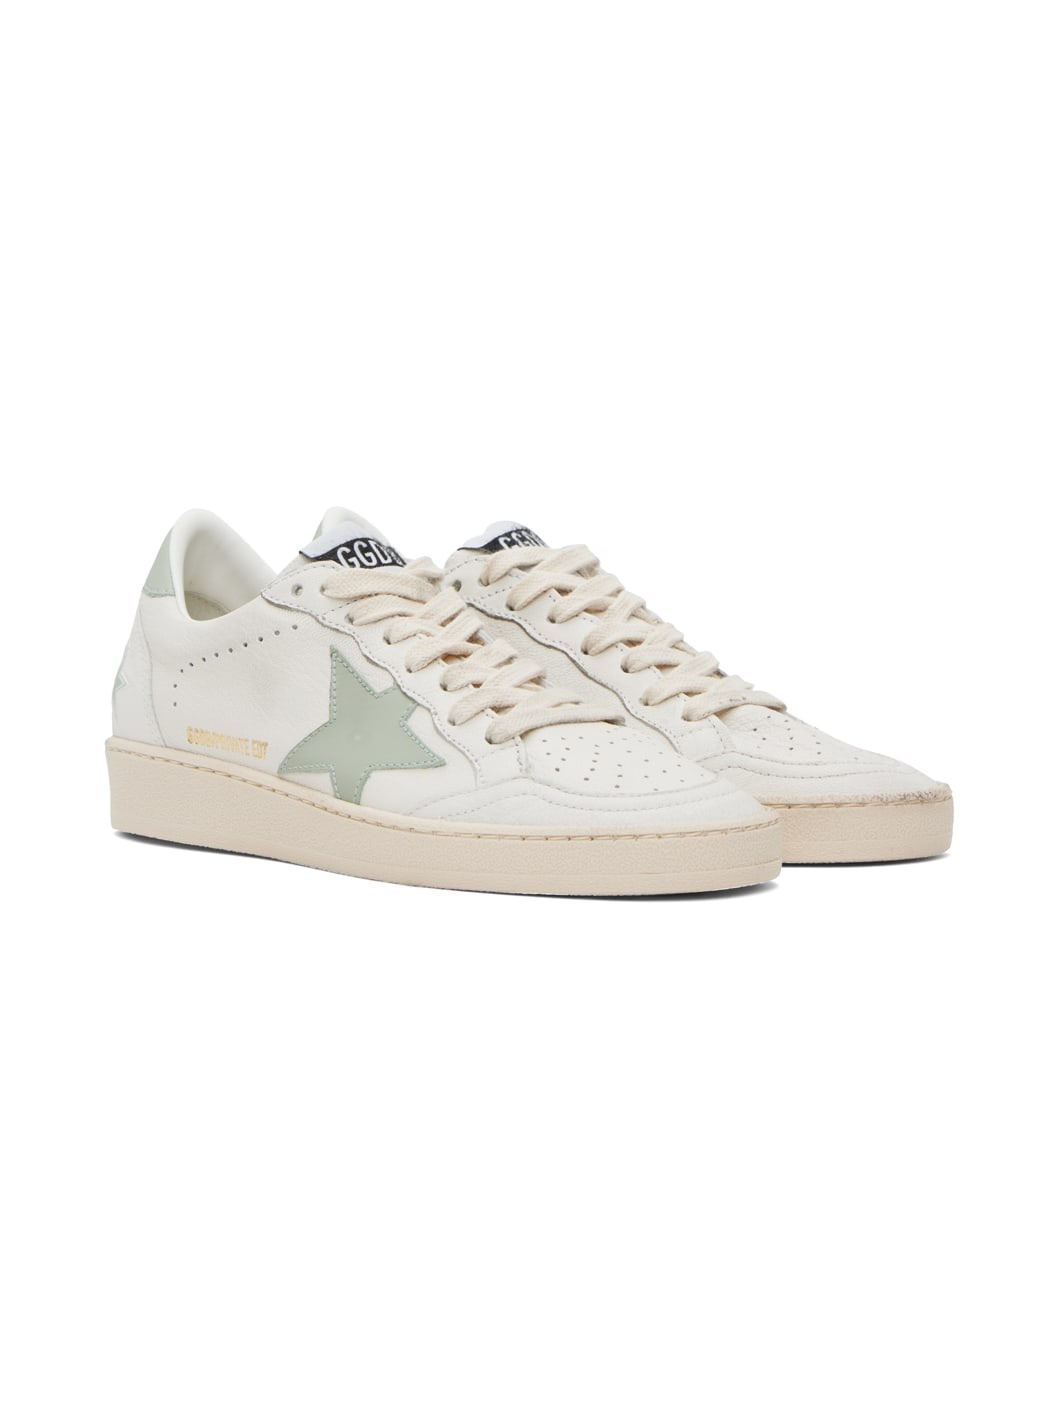 SSENSE Exclusive White & Green Ball Star Sneakers - 4